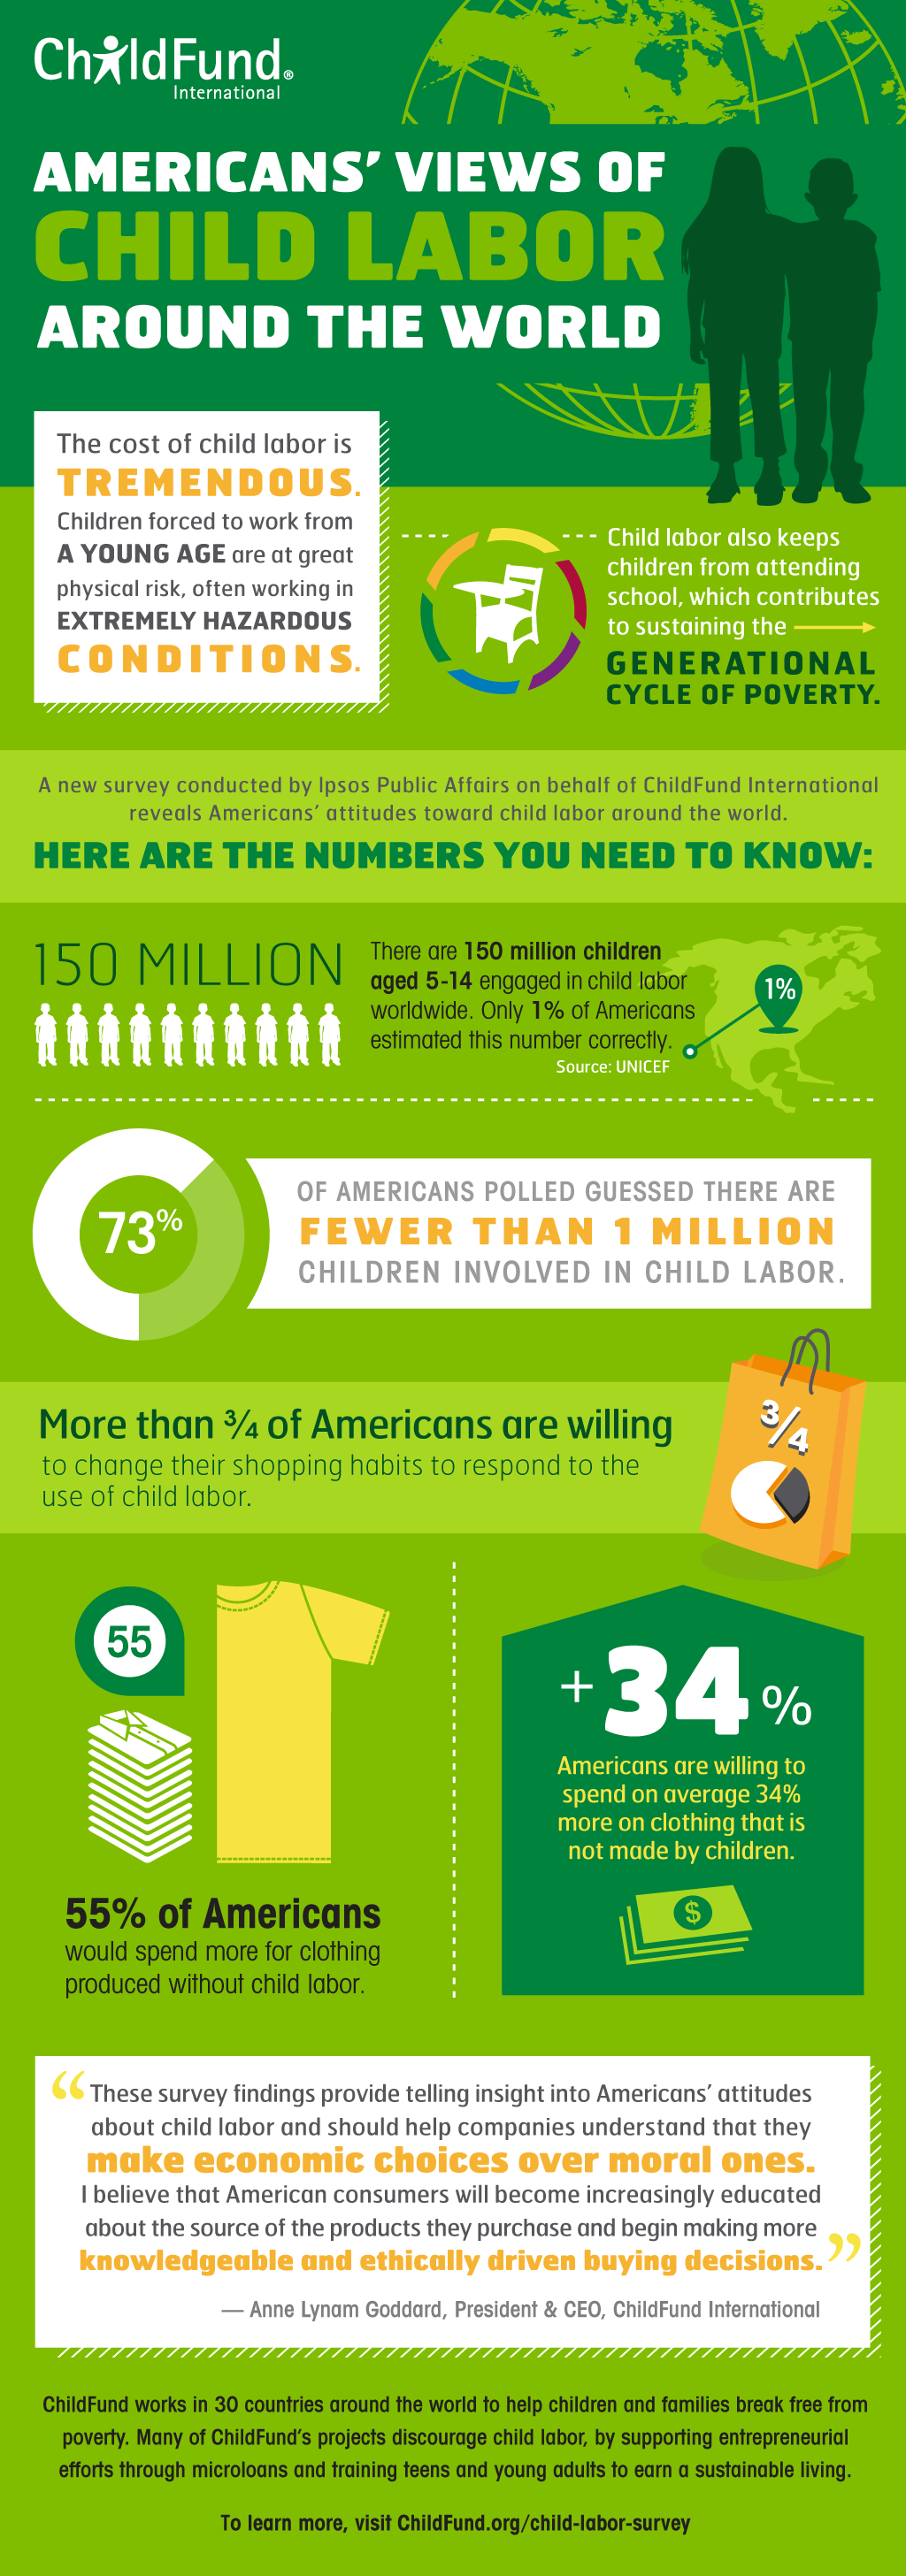 Global Child Labor Facts